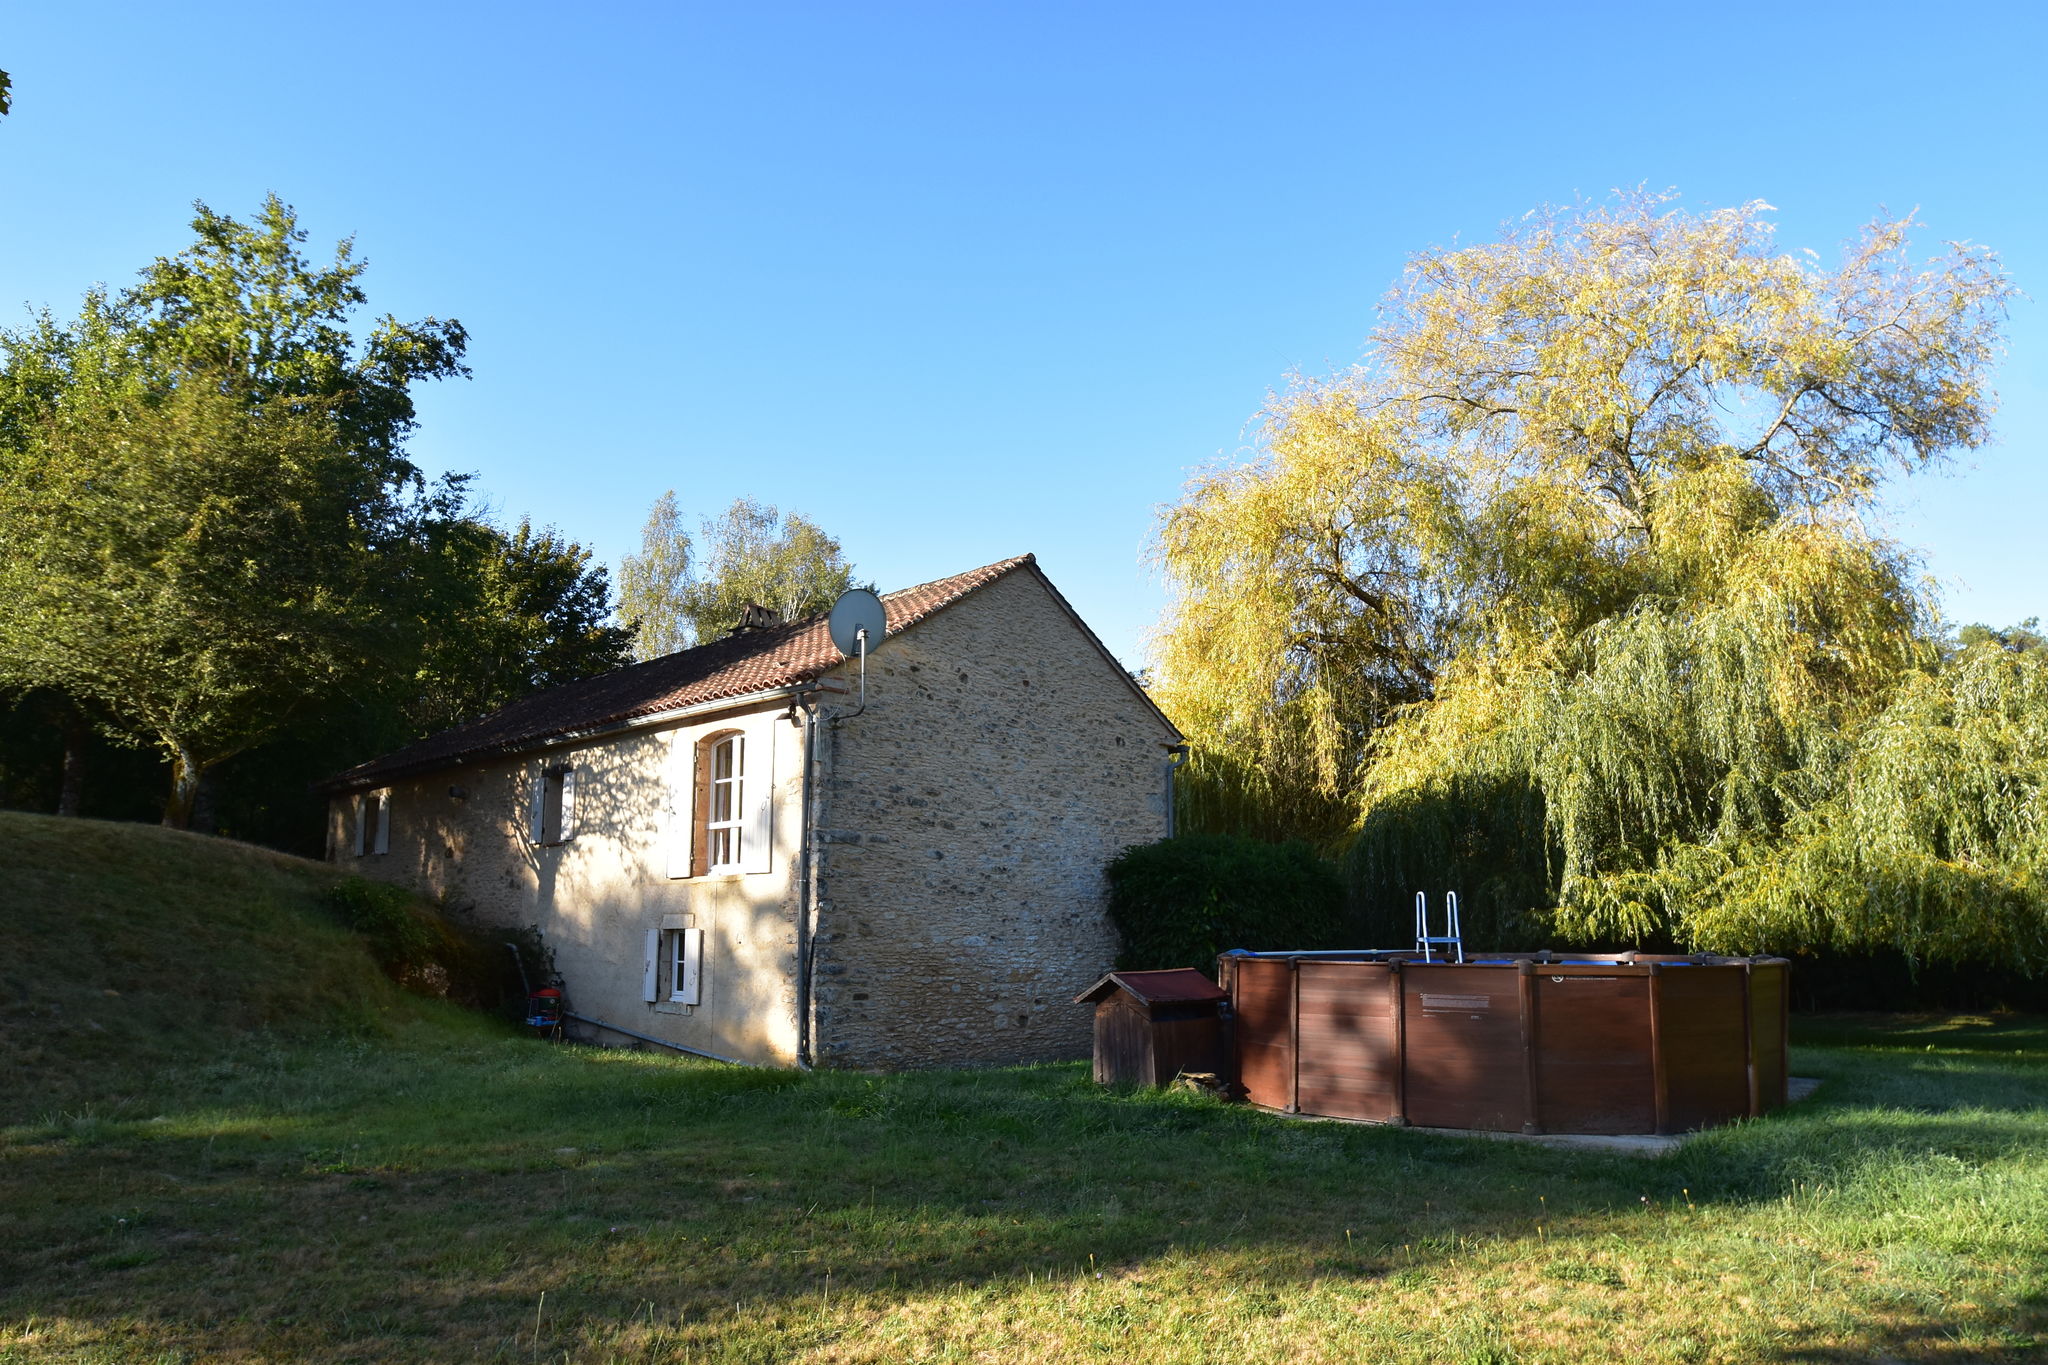 Characteristic house near Villefranche-du-Périgord (5 km) with round private swimming pool